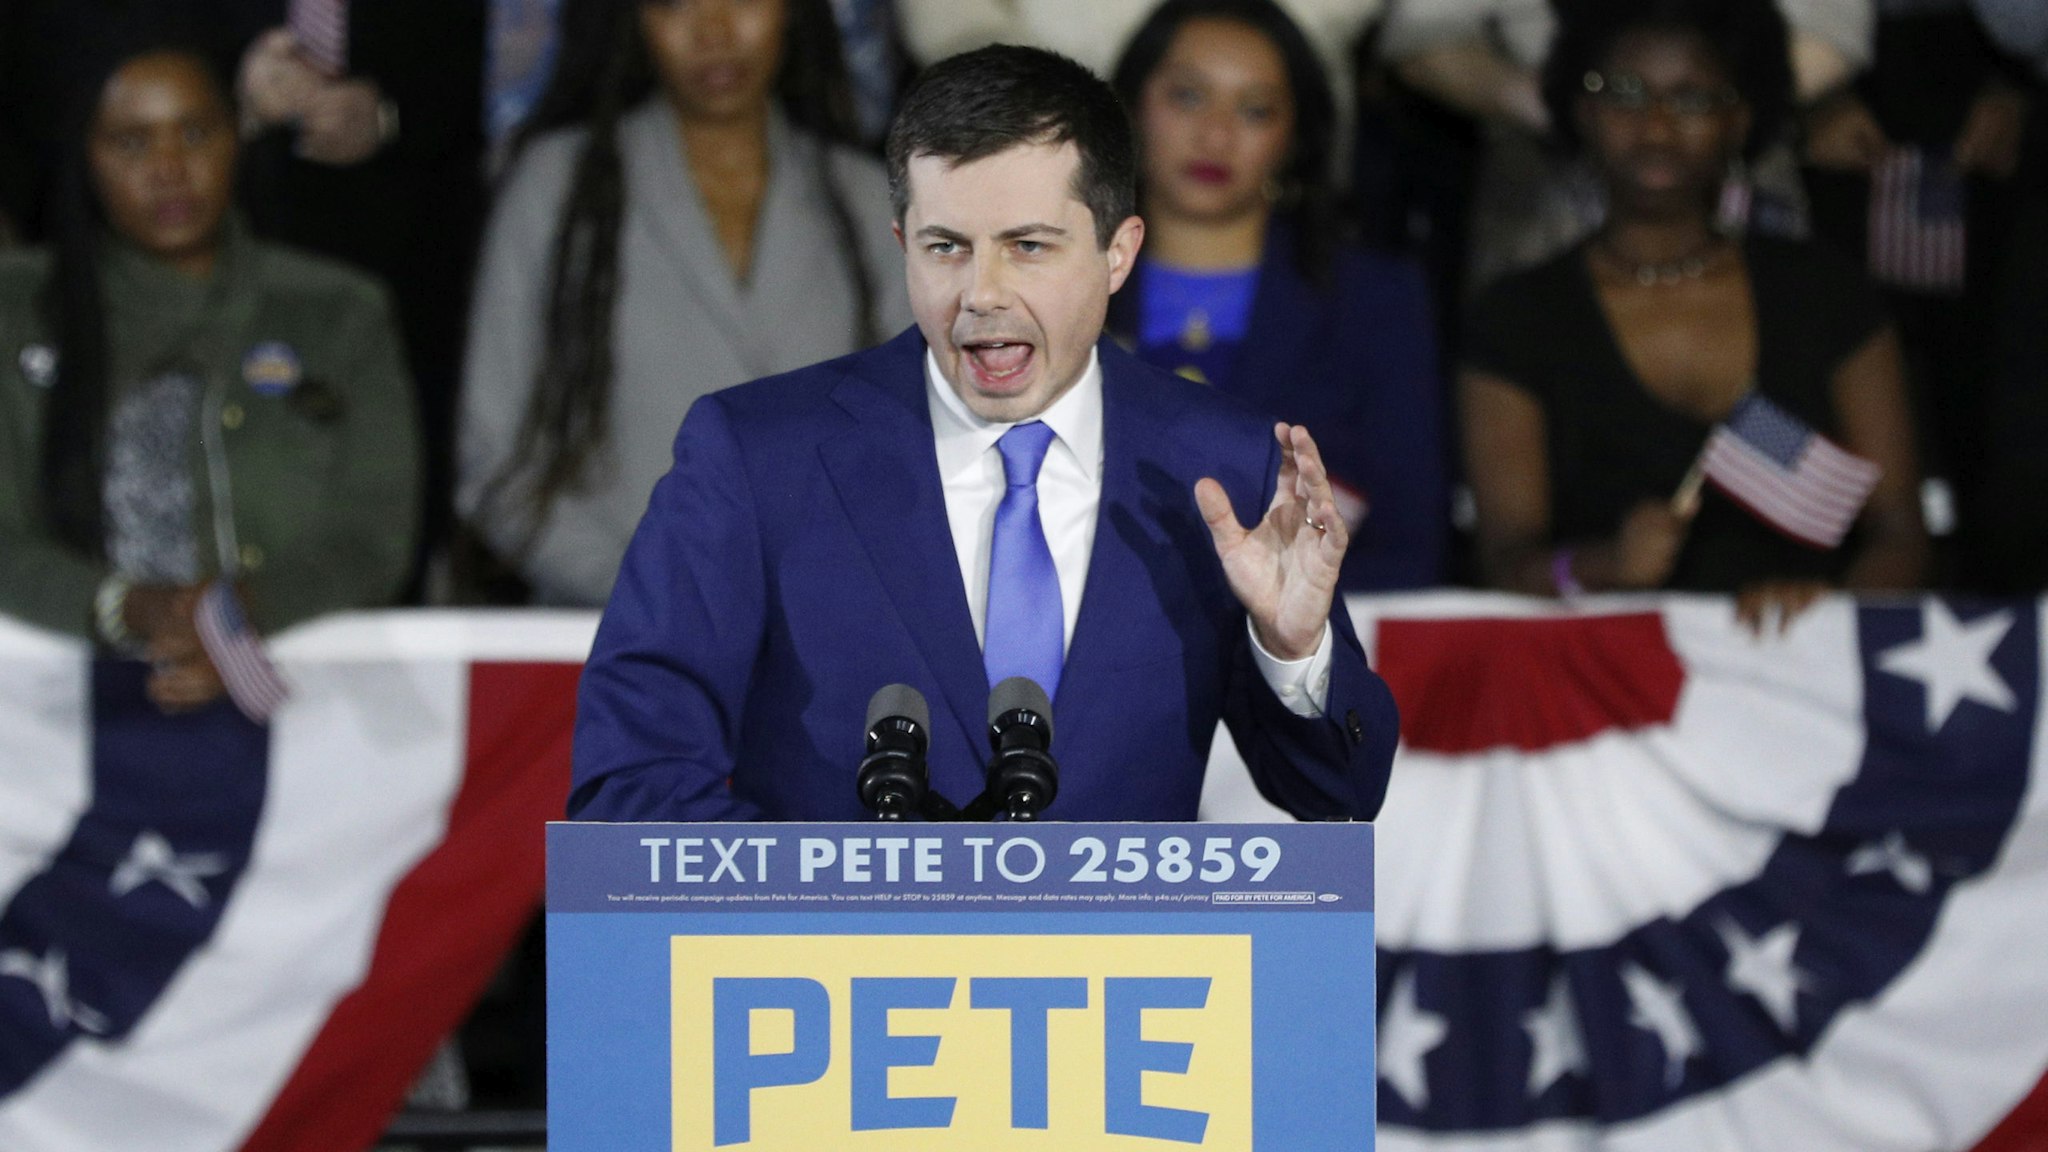 DES MOINES, IOWA - FEBRUARY 03: Democratic presidential candidate former South Bend, Indiana Mayor Pete Buttigieg addresses supporters during his caucus night watch party on February 03, 2020 in Des Moines, Iowa. Iowa is the first contest in the 2020 presidential nominating process with the candidates then moving on to New Hampshire.